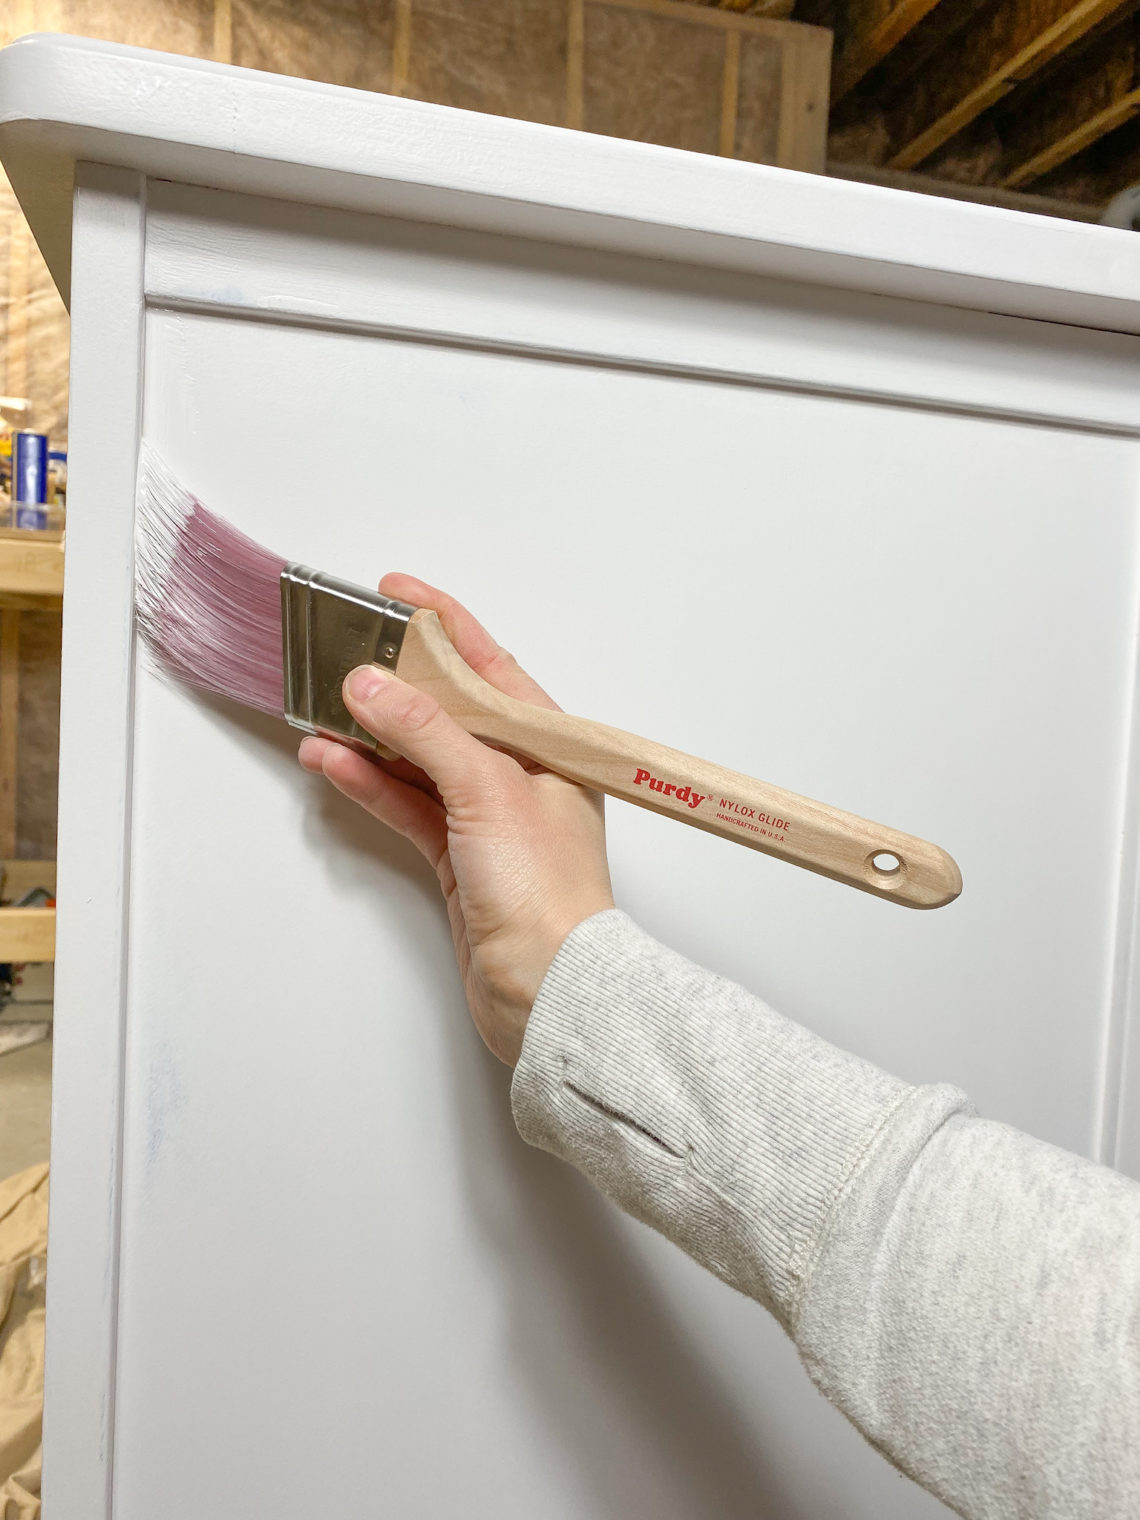 Furniture Painting With A Roller Brush